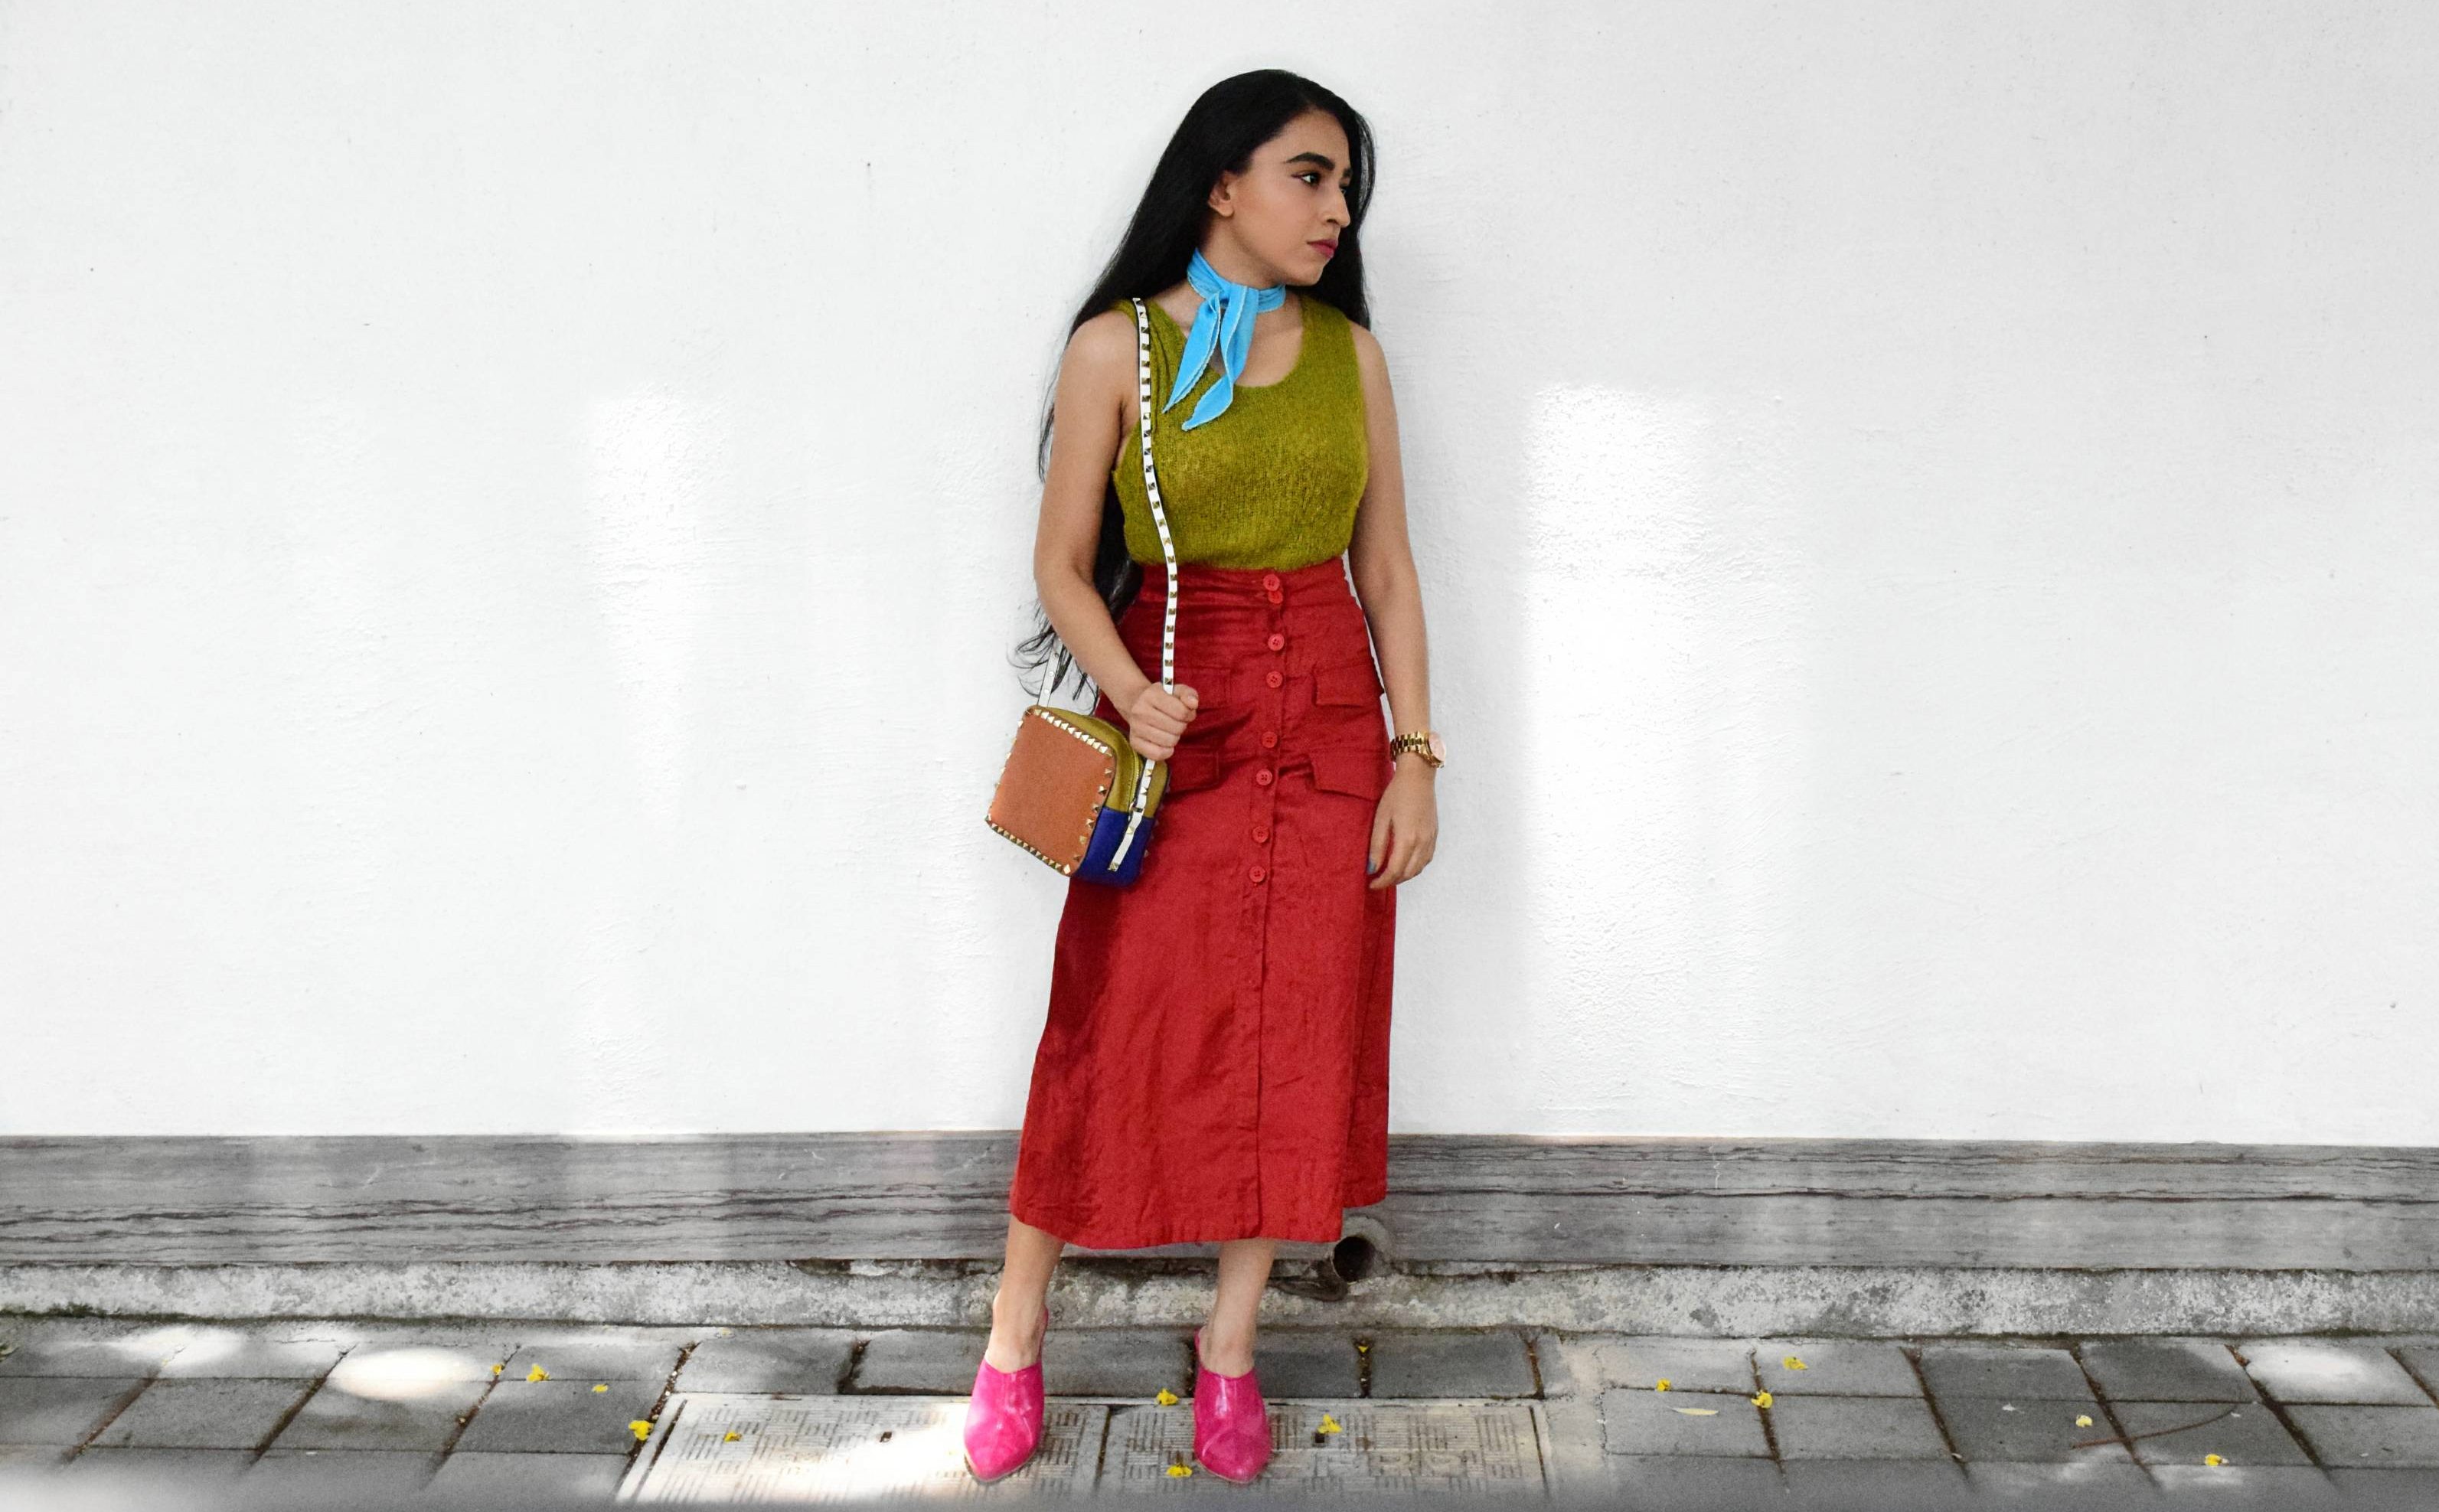 color riot, colorful style, strret style, lakme fashion week, mumbai streets, mumbai street style, fashion week, maroon skirt, skirt style, chartreuse, neck scarf, how to wear a scarf, studded bag, pink mules, mules, colorblocking, outfit, ootd, blogger, fashion blogger